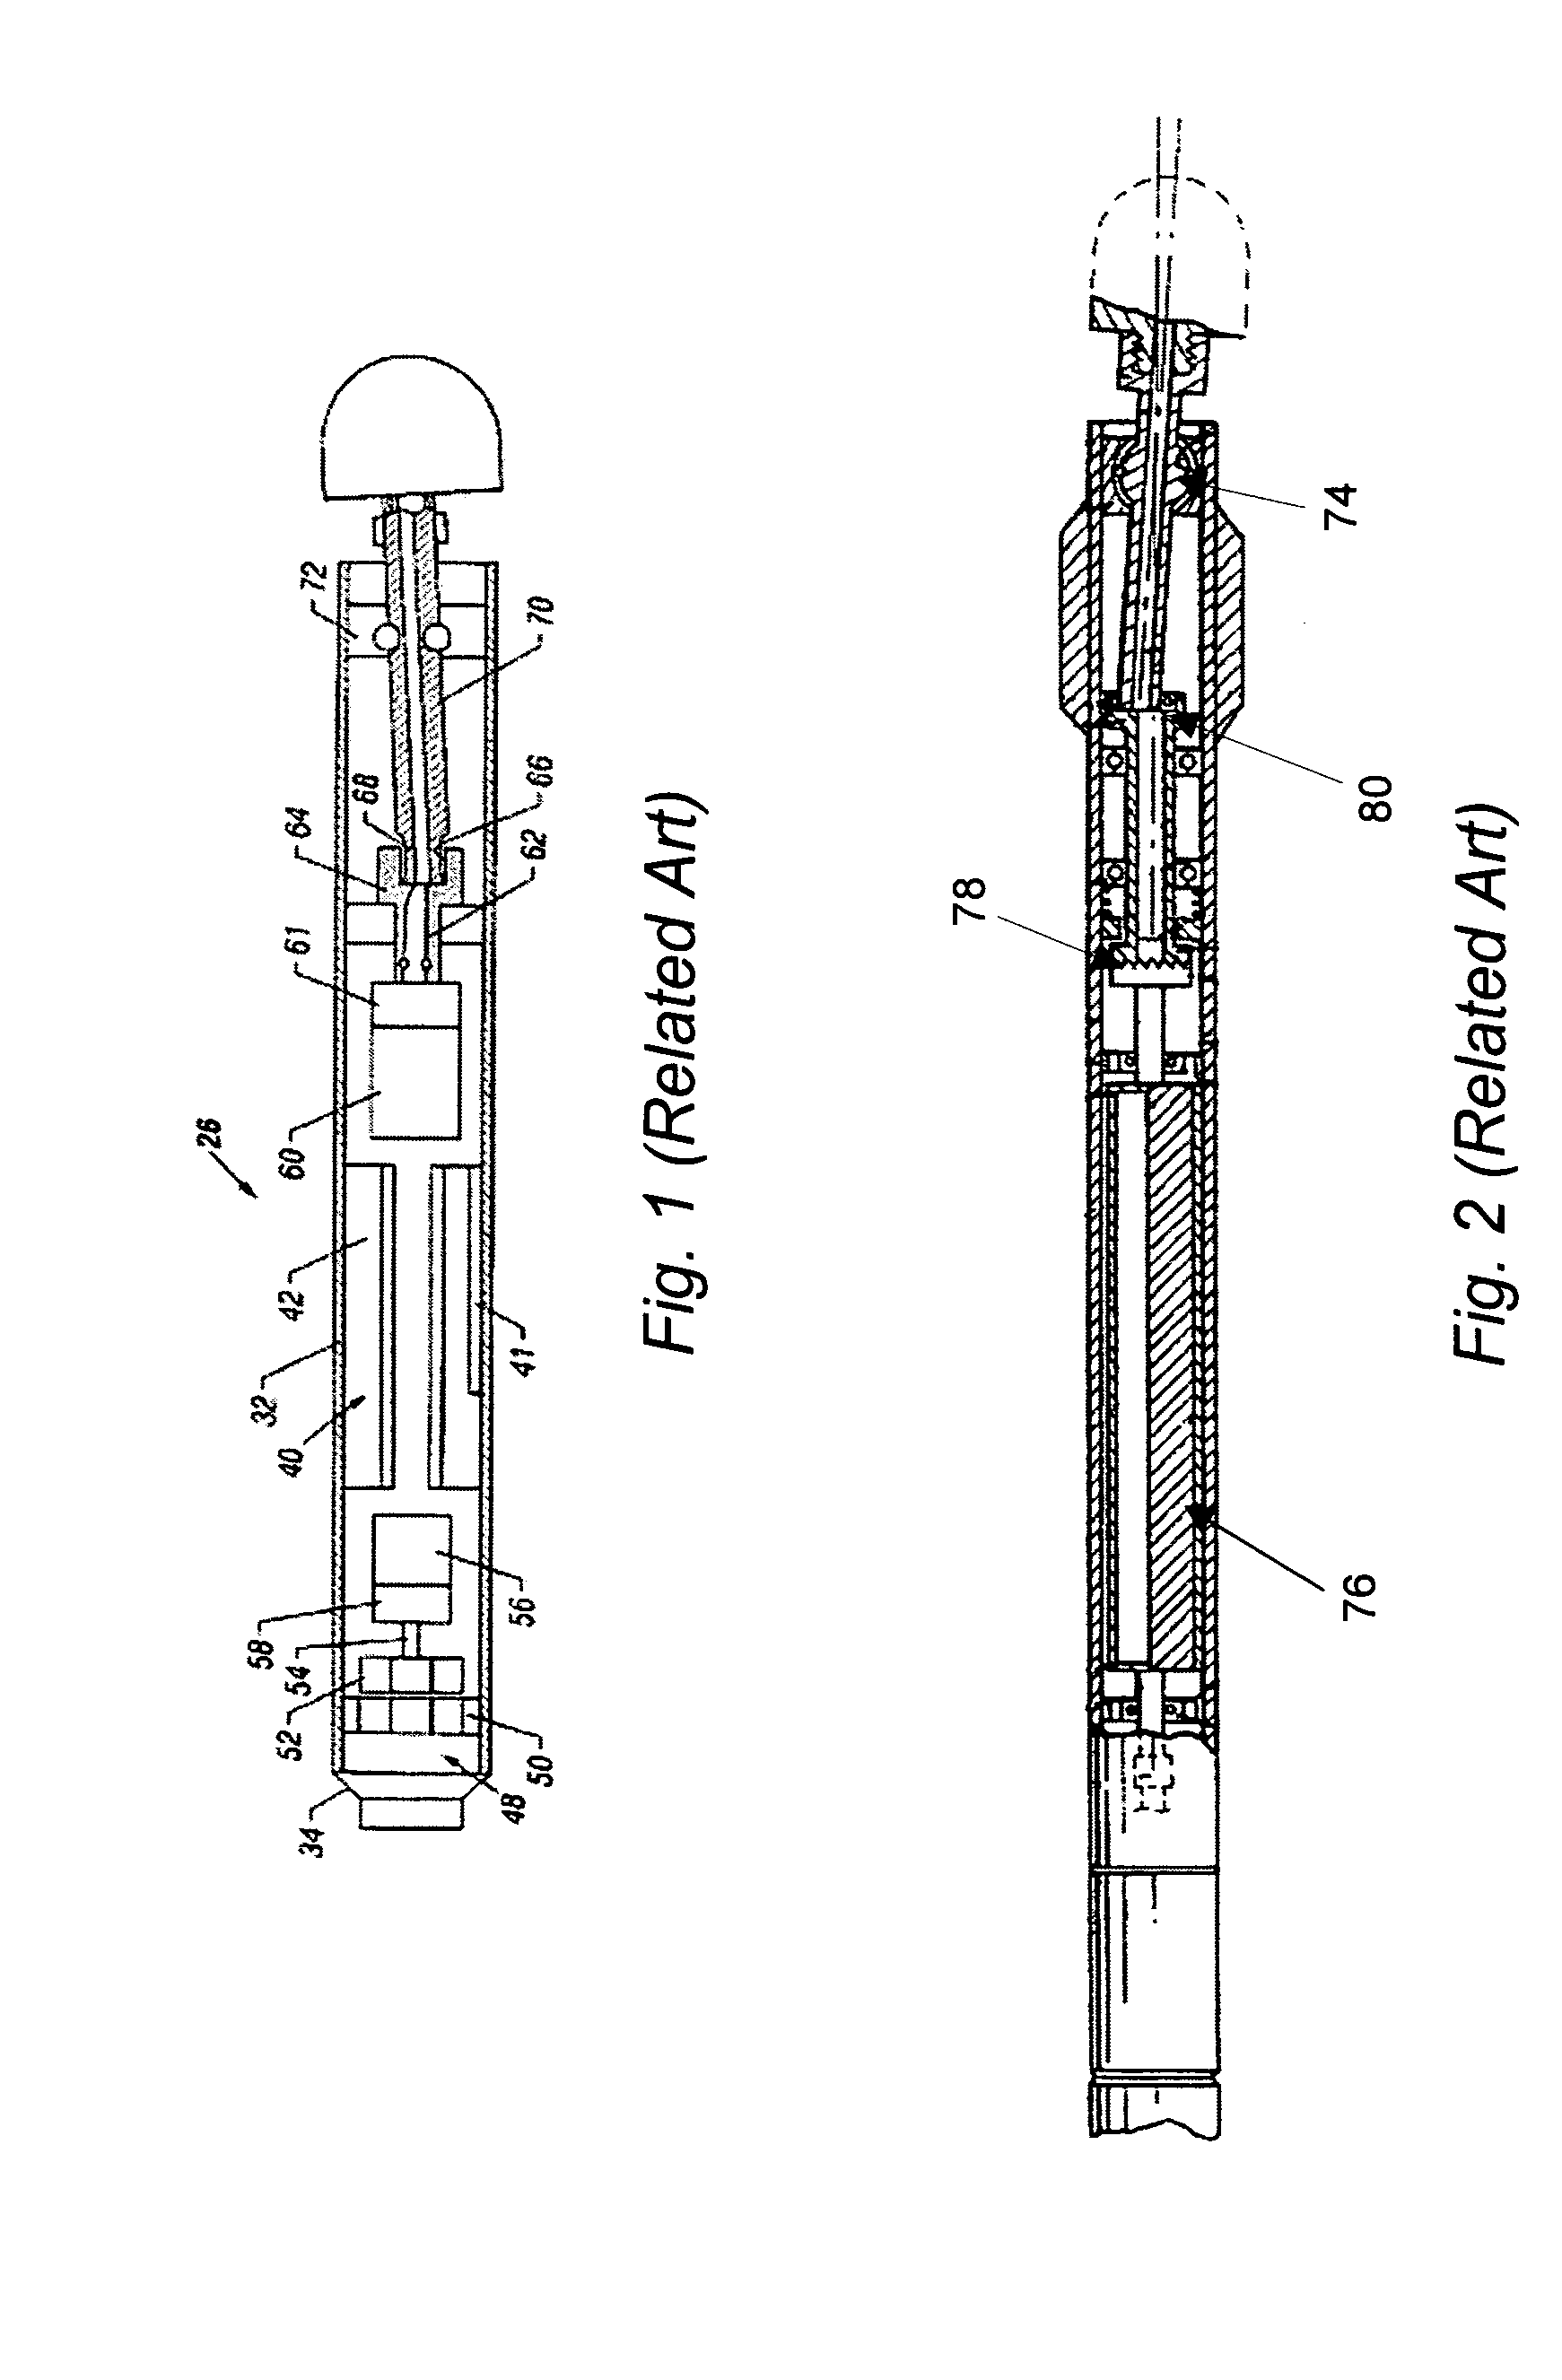 Systems and methods for directionally drilling a borehole using a continuously variable transmission